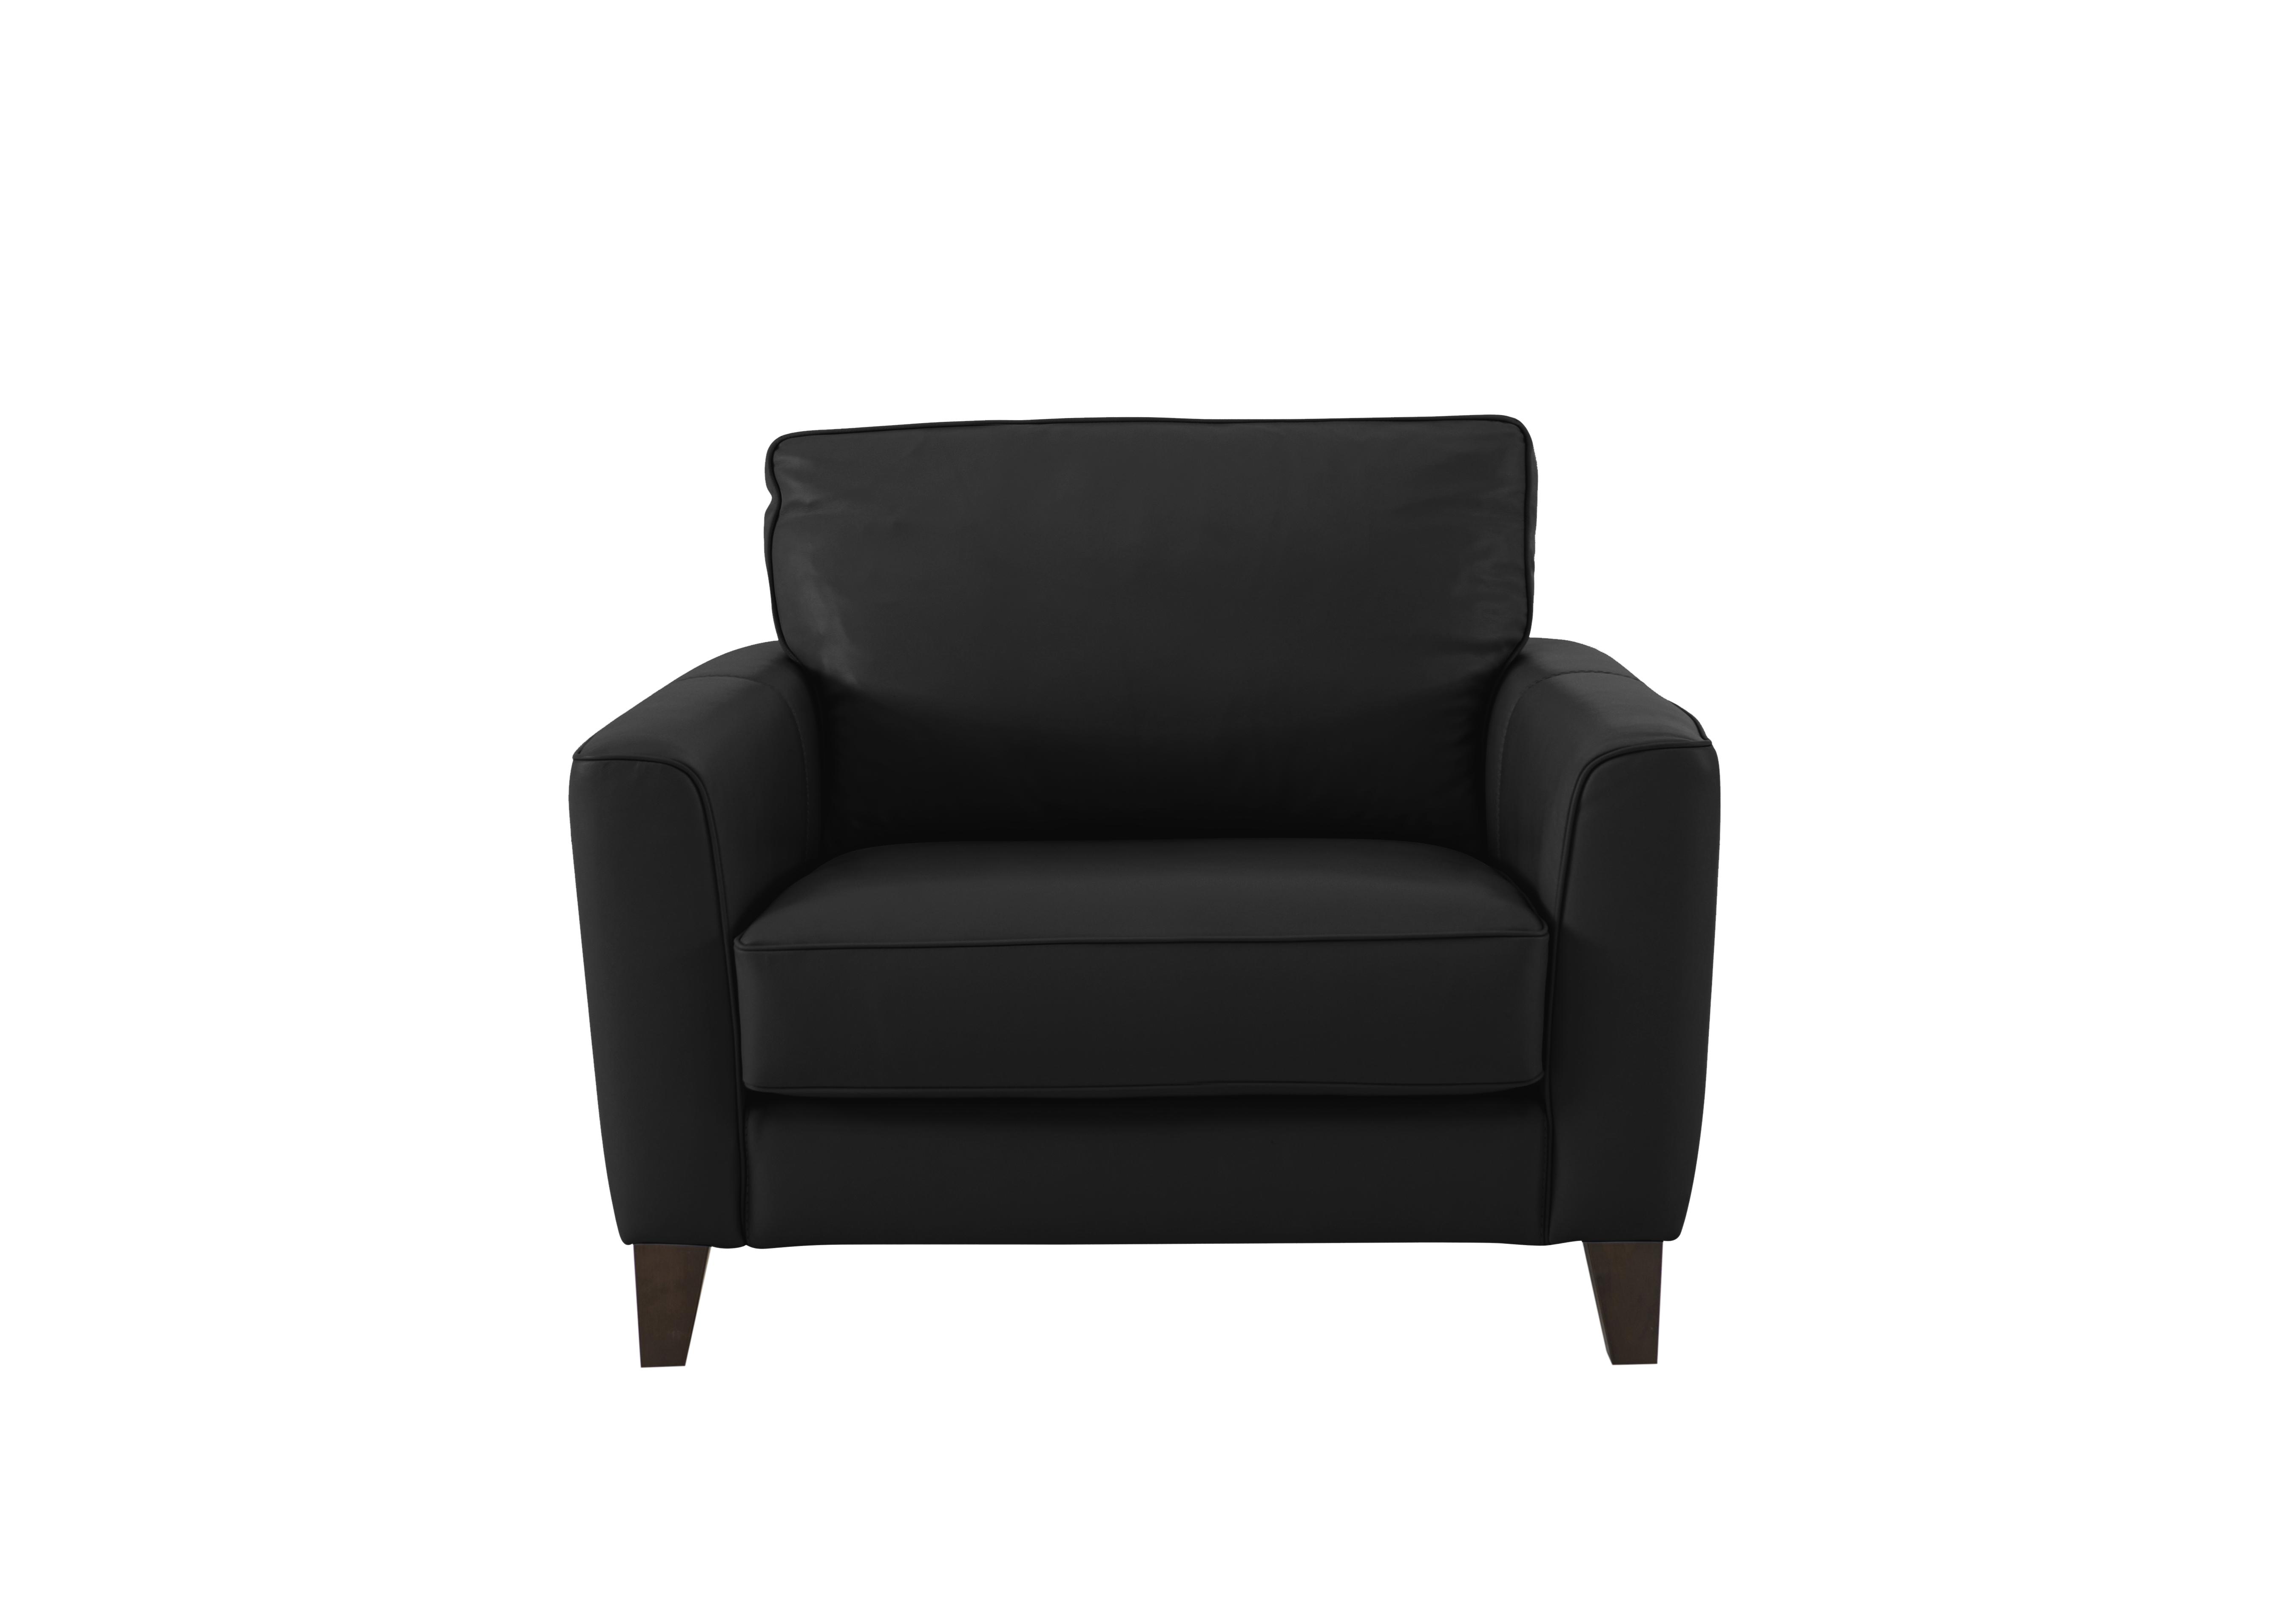 Brondby Leather Cuddle Chair in Bv-3500 Classic Black on Furniture Village